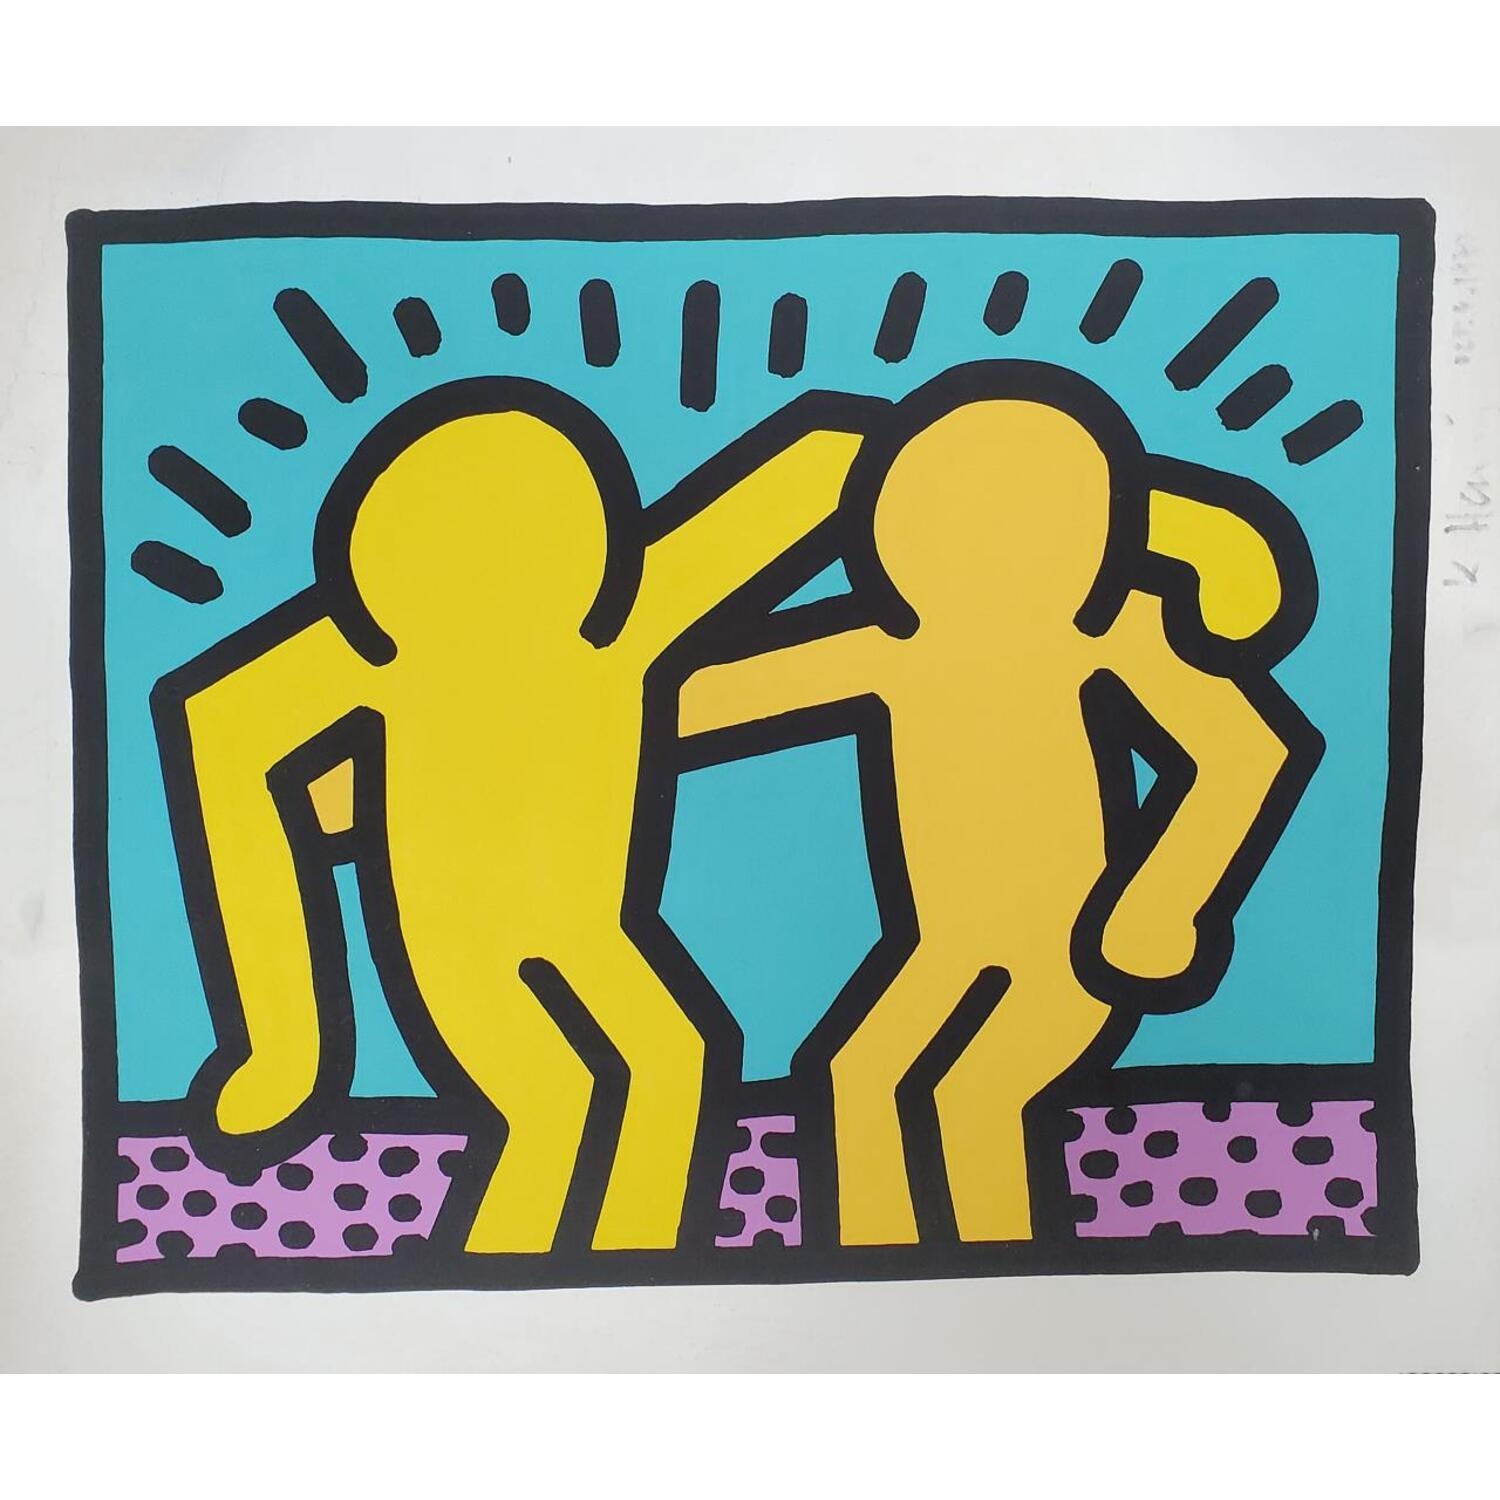 Keith Haring Signed and Attributed Silk Screen by Keith Haring